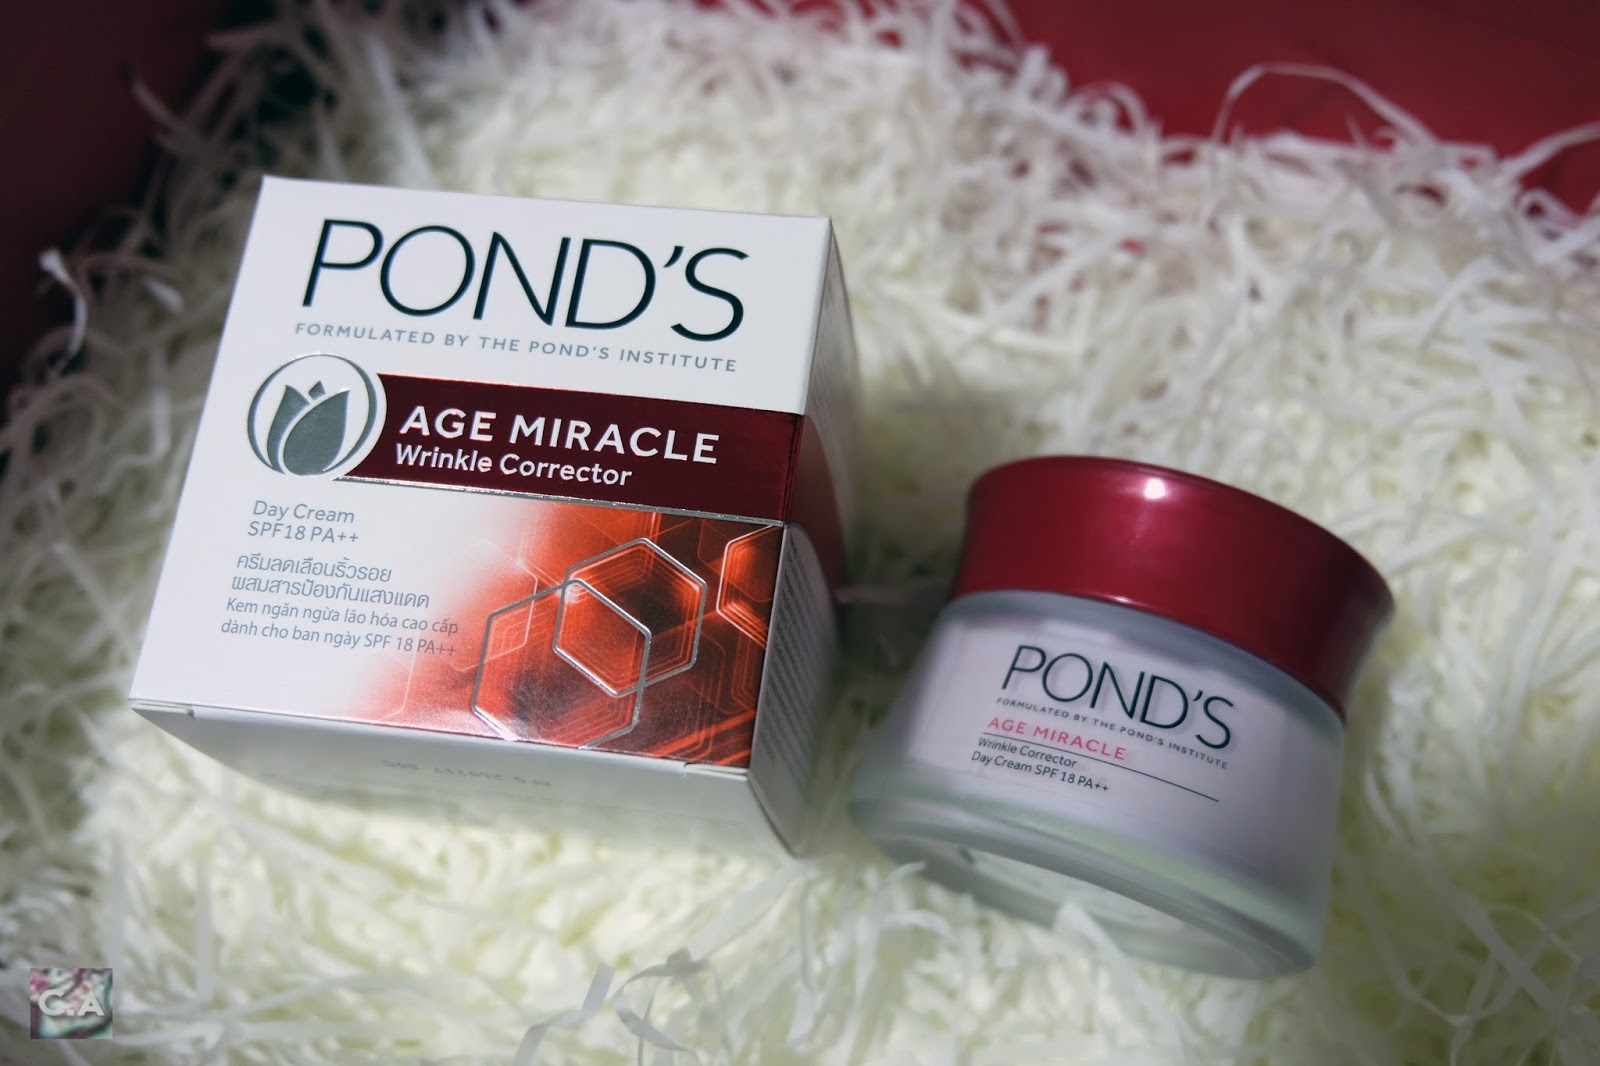 Pond's Age Miracle Wrinkle Corrector Day Cream SPF 18 PA++ Curitan Aqalili